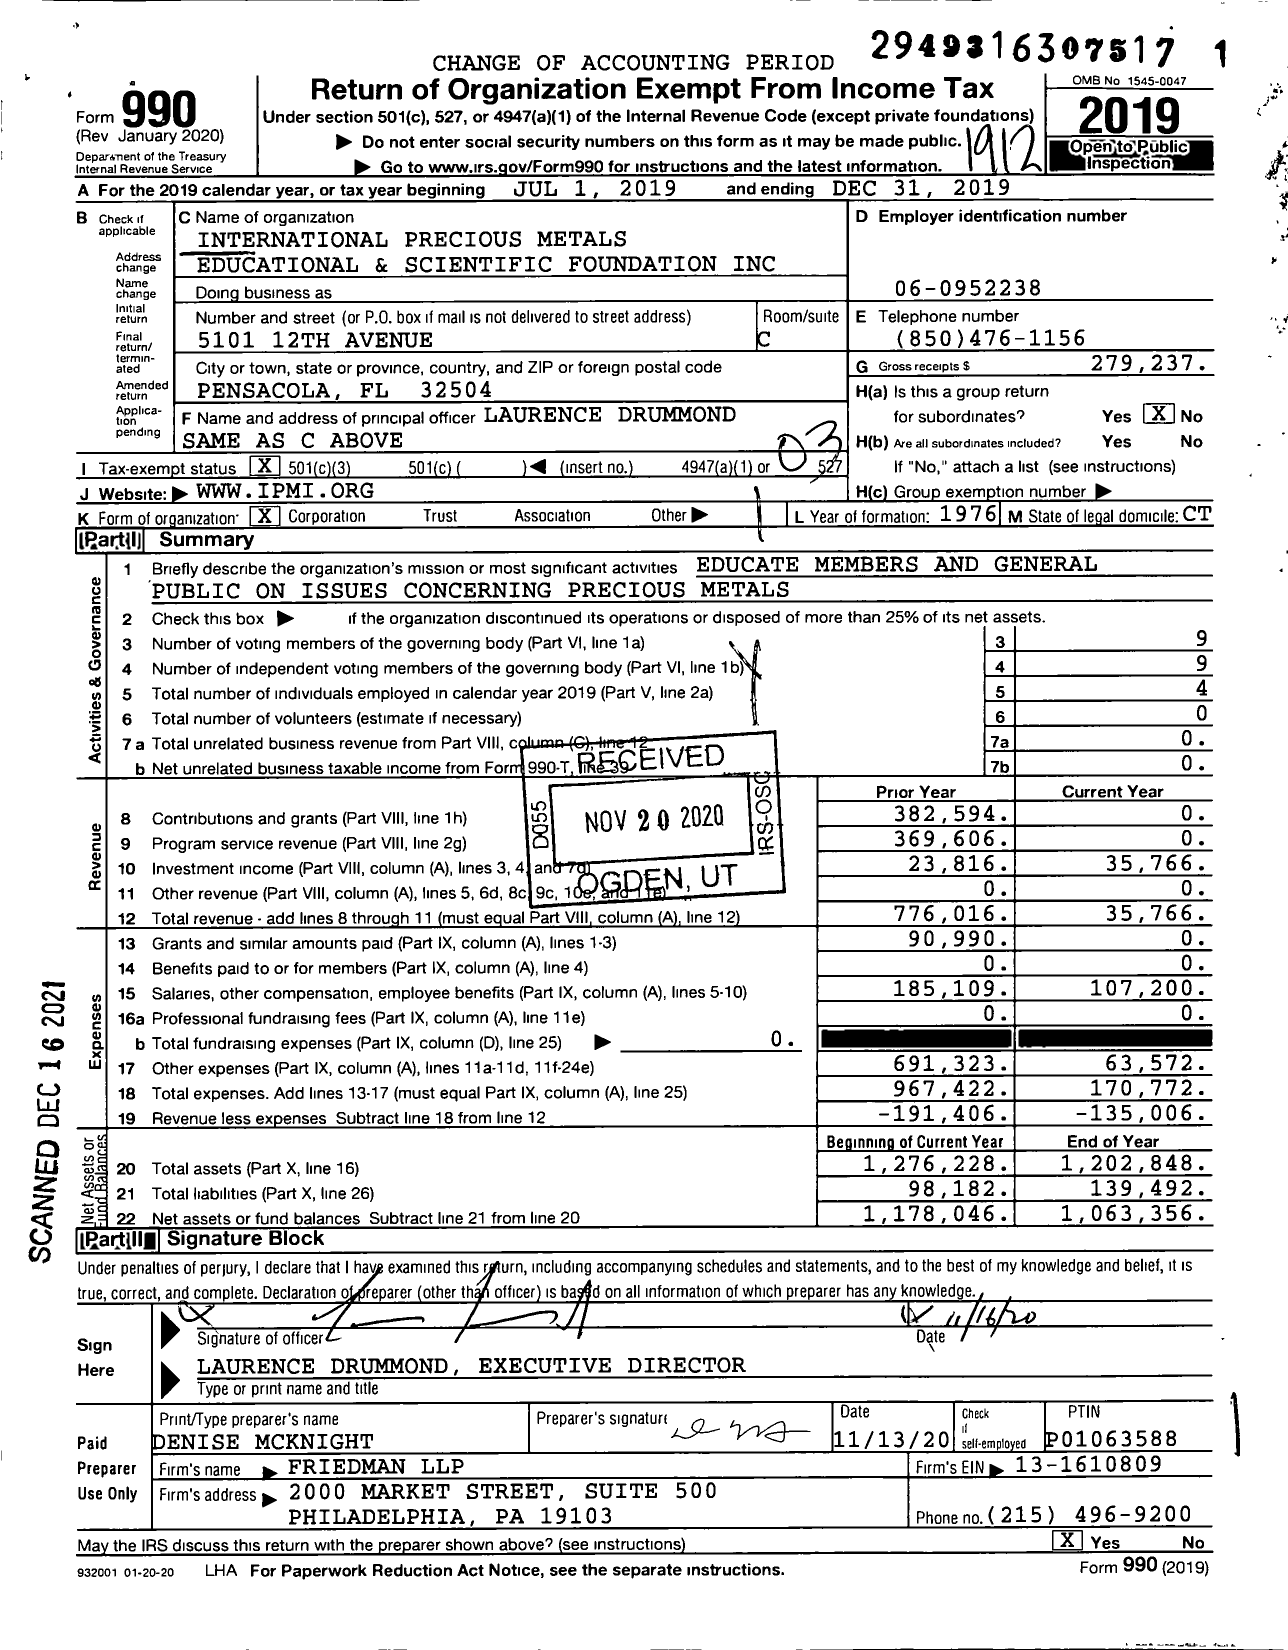 Image of first page of 2019 Form 990 for International Precious Metals Educational and Scientific Foundation (IPMI)